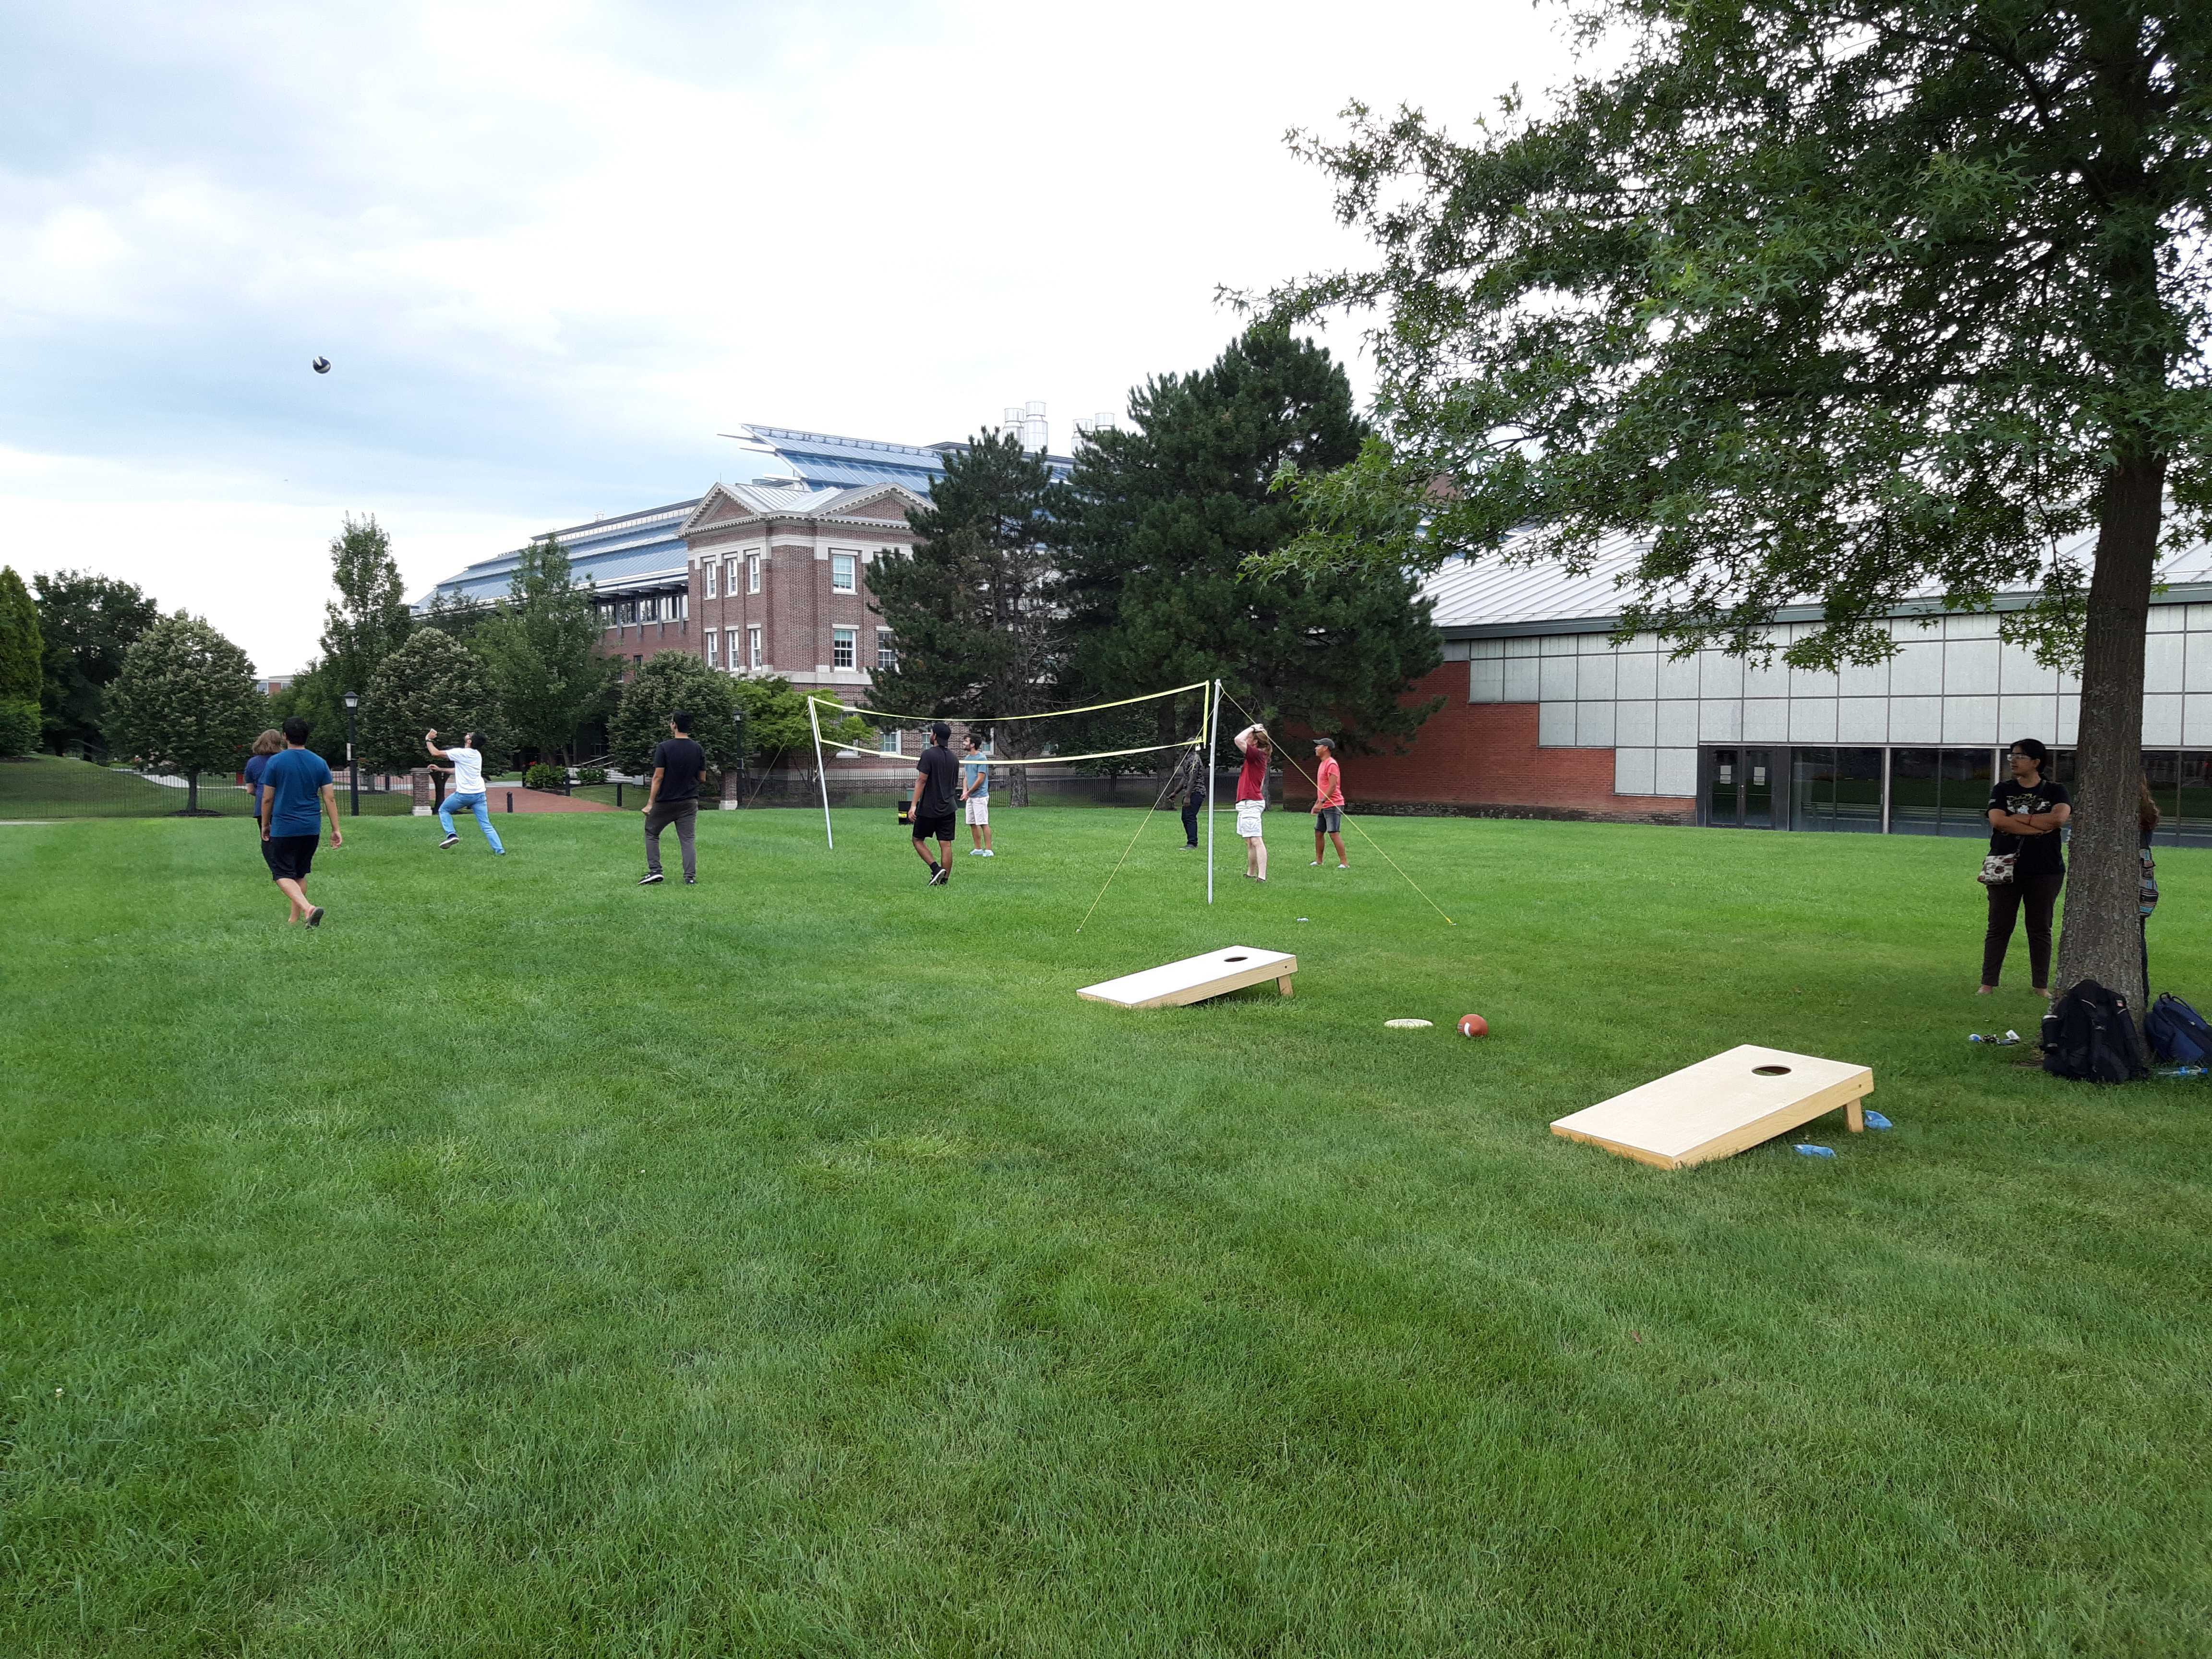 People playing volleyball on campus lawn